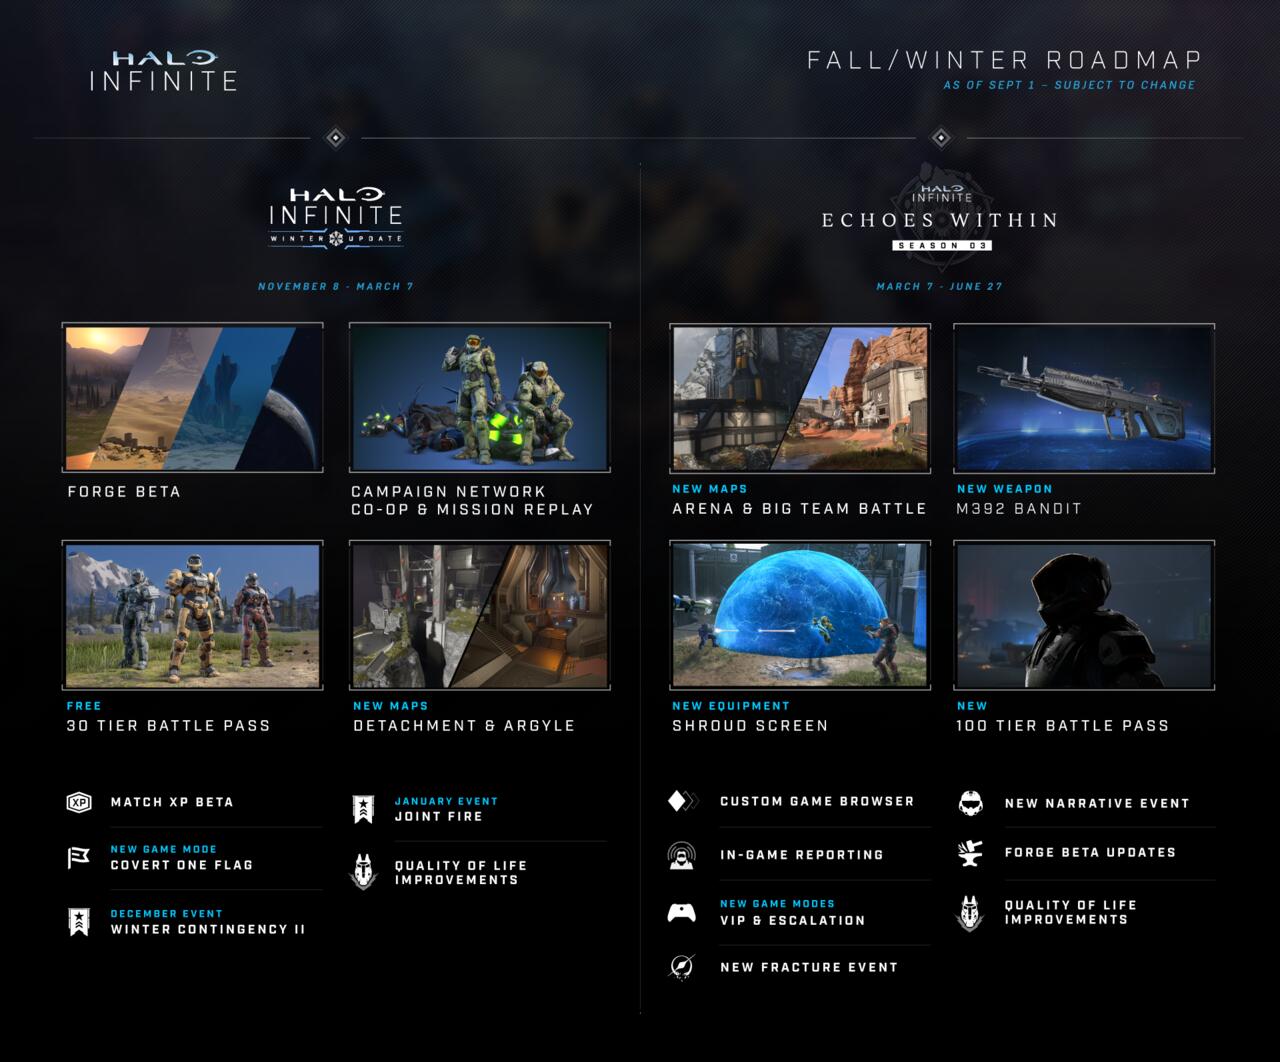 What's next for Halo Infinite